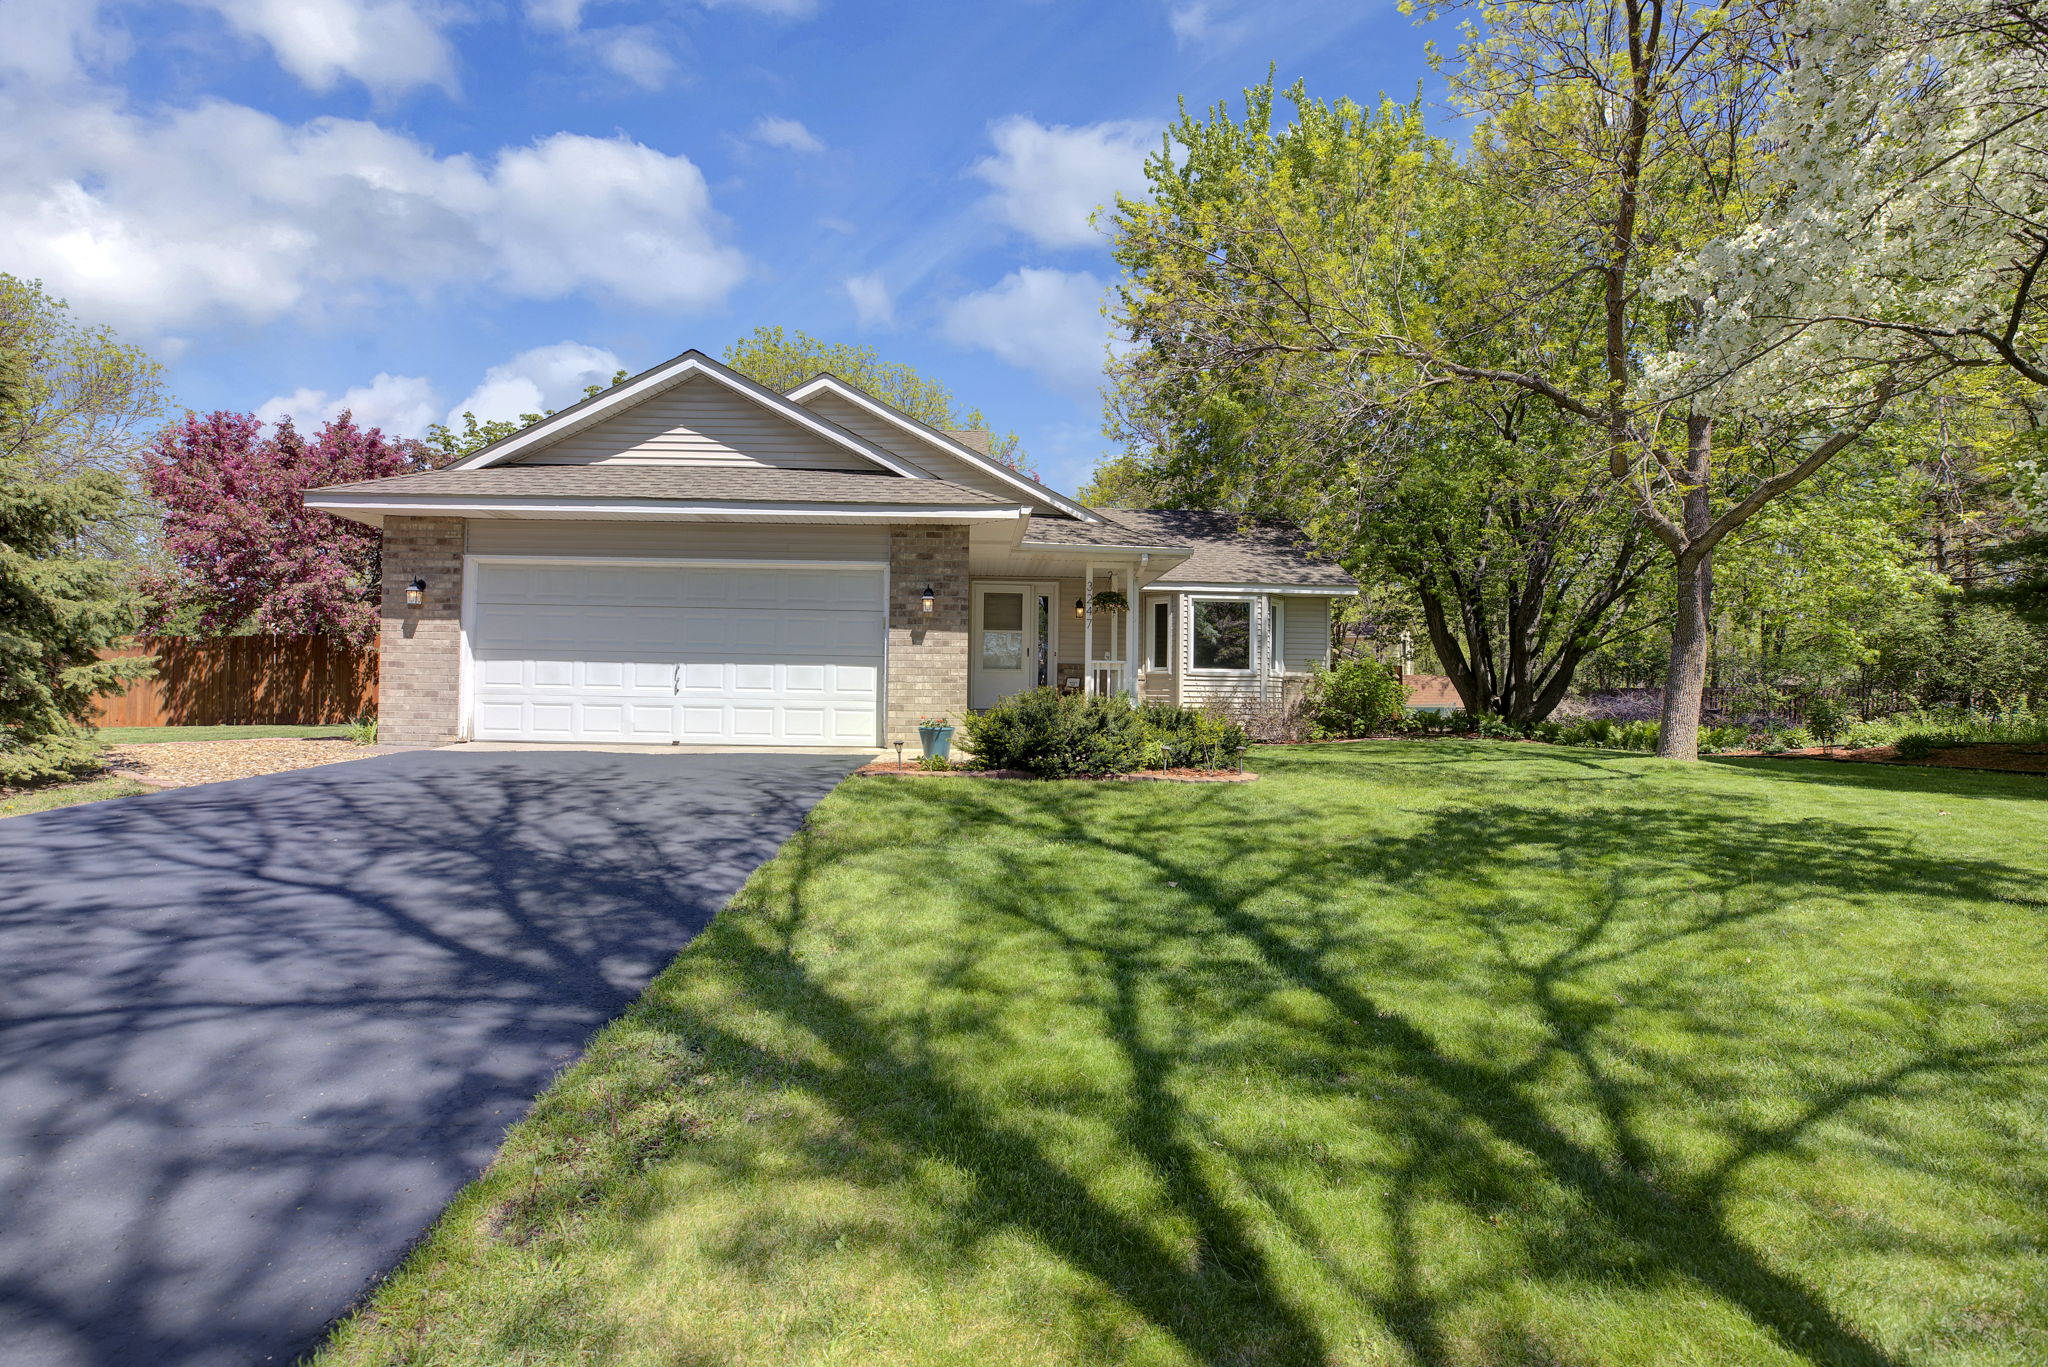  3247 132nd Circle NW, Coon Rapids, MN 55448, US